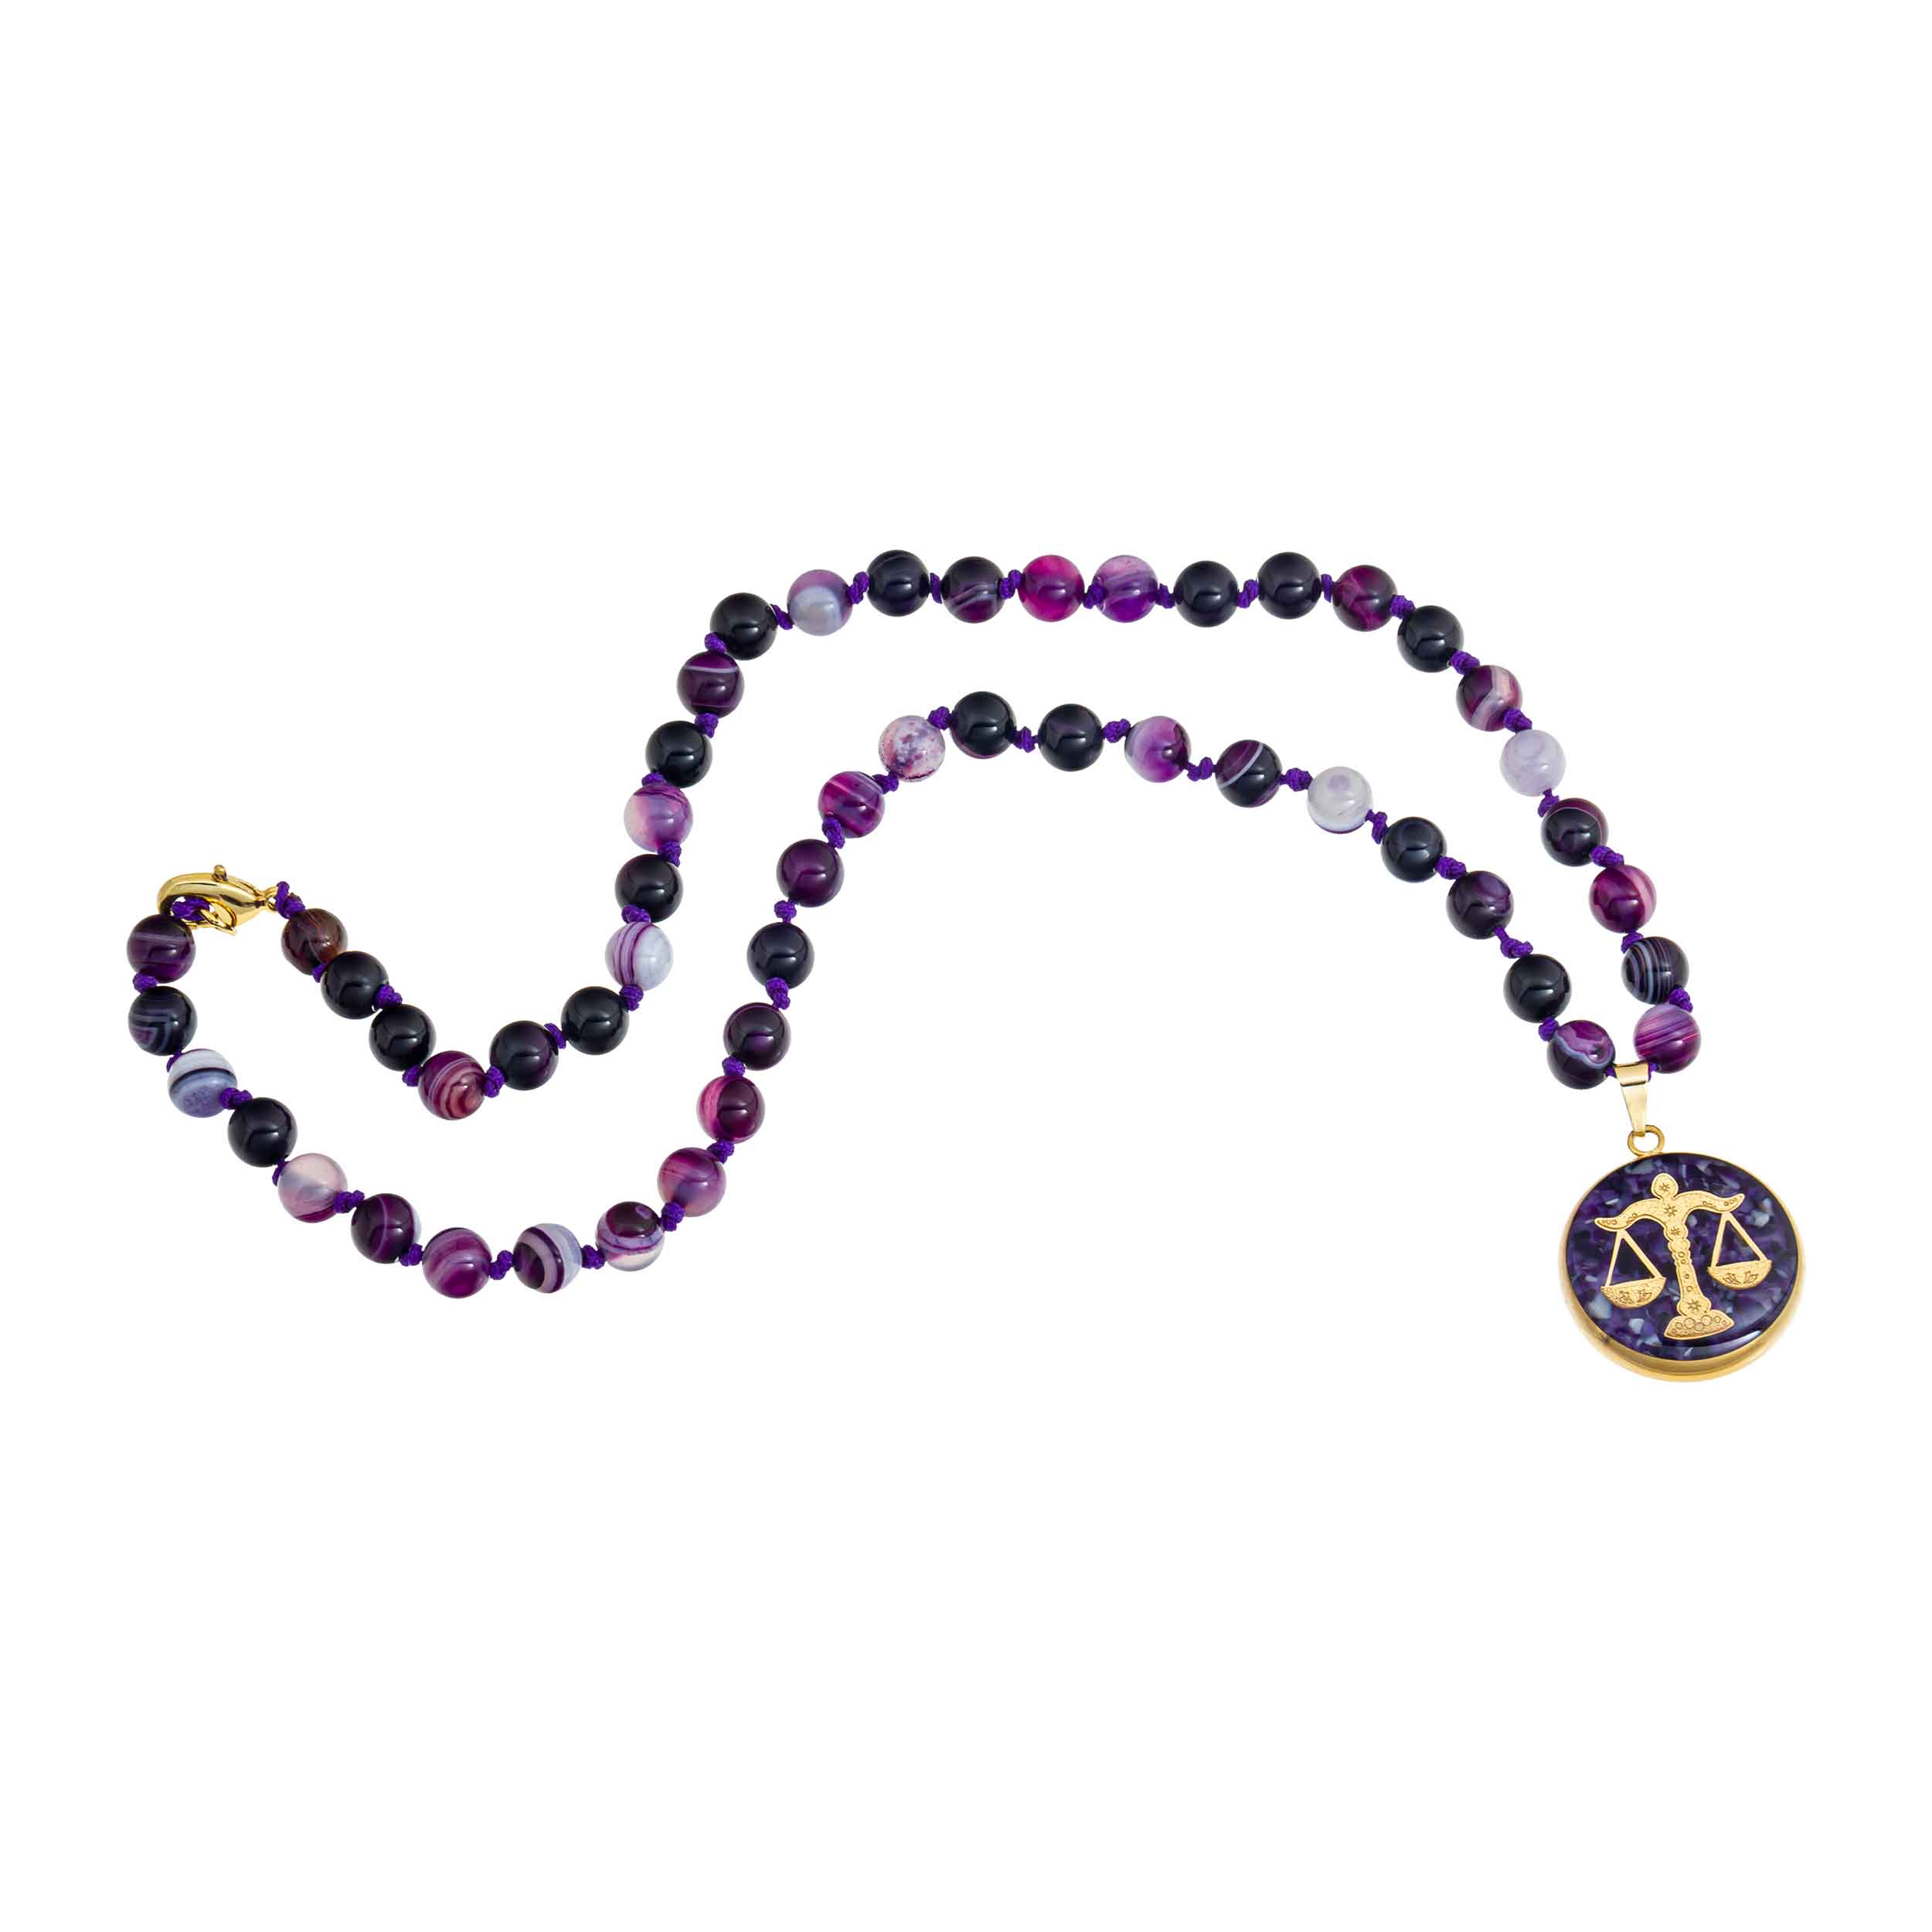 Purple agate necklace and 24 carat gold leaf with the symbol of October